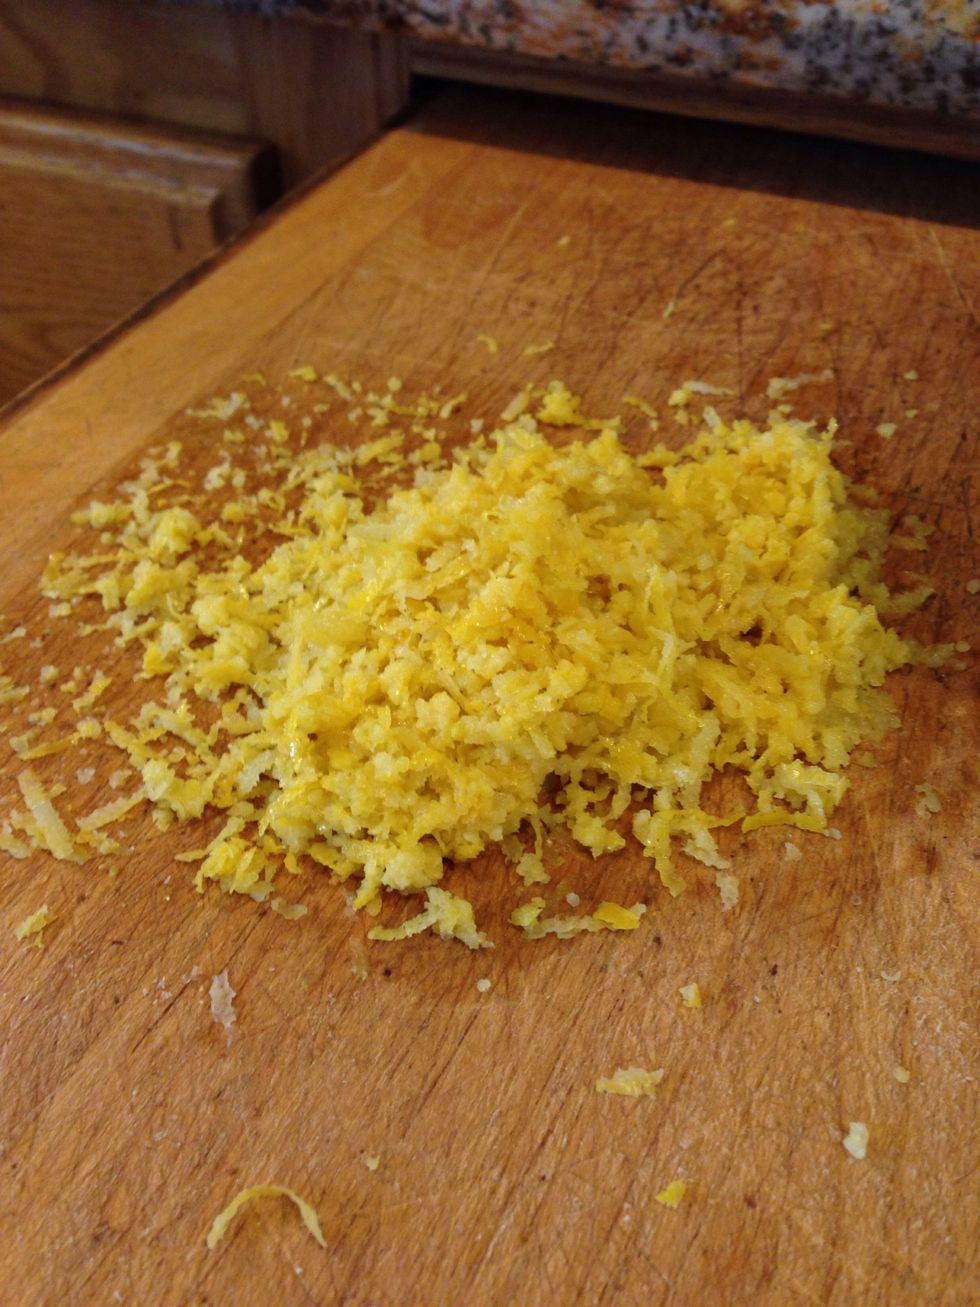 Zest your lemons, (this is basically just grating the peel!)